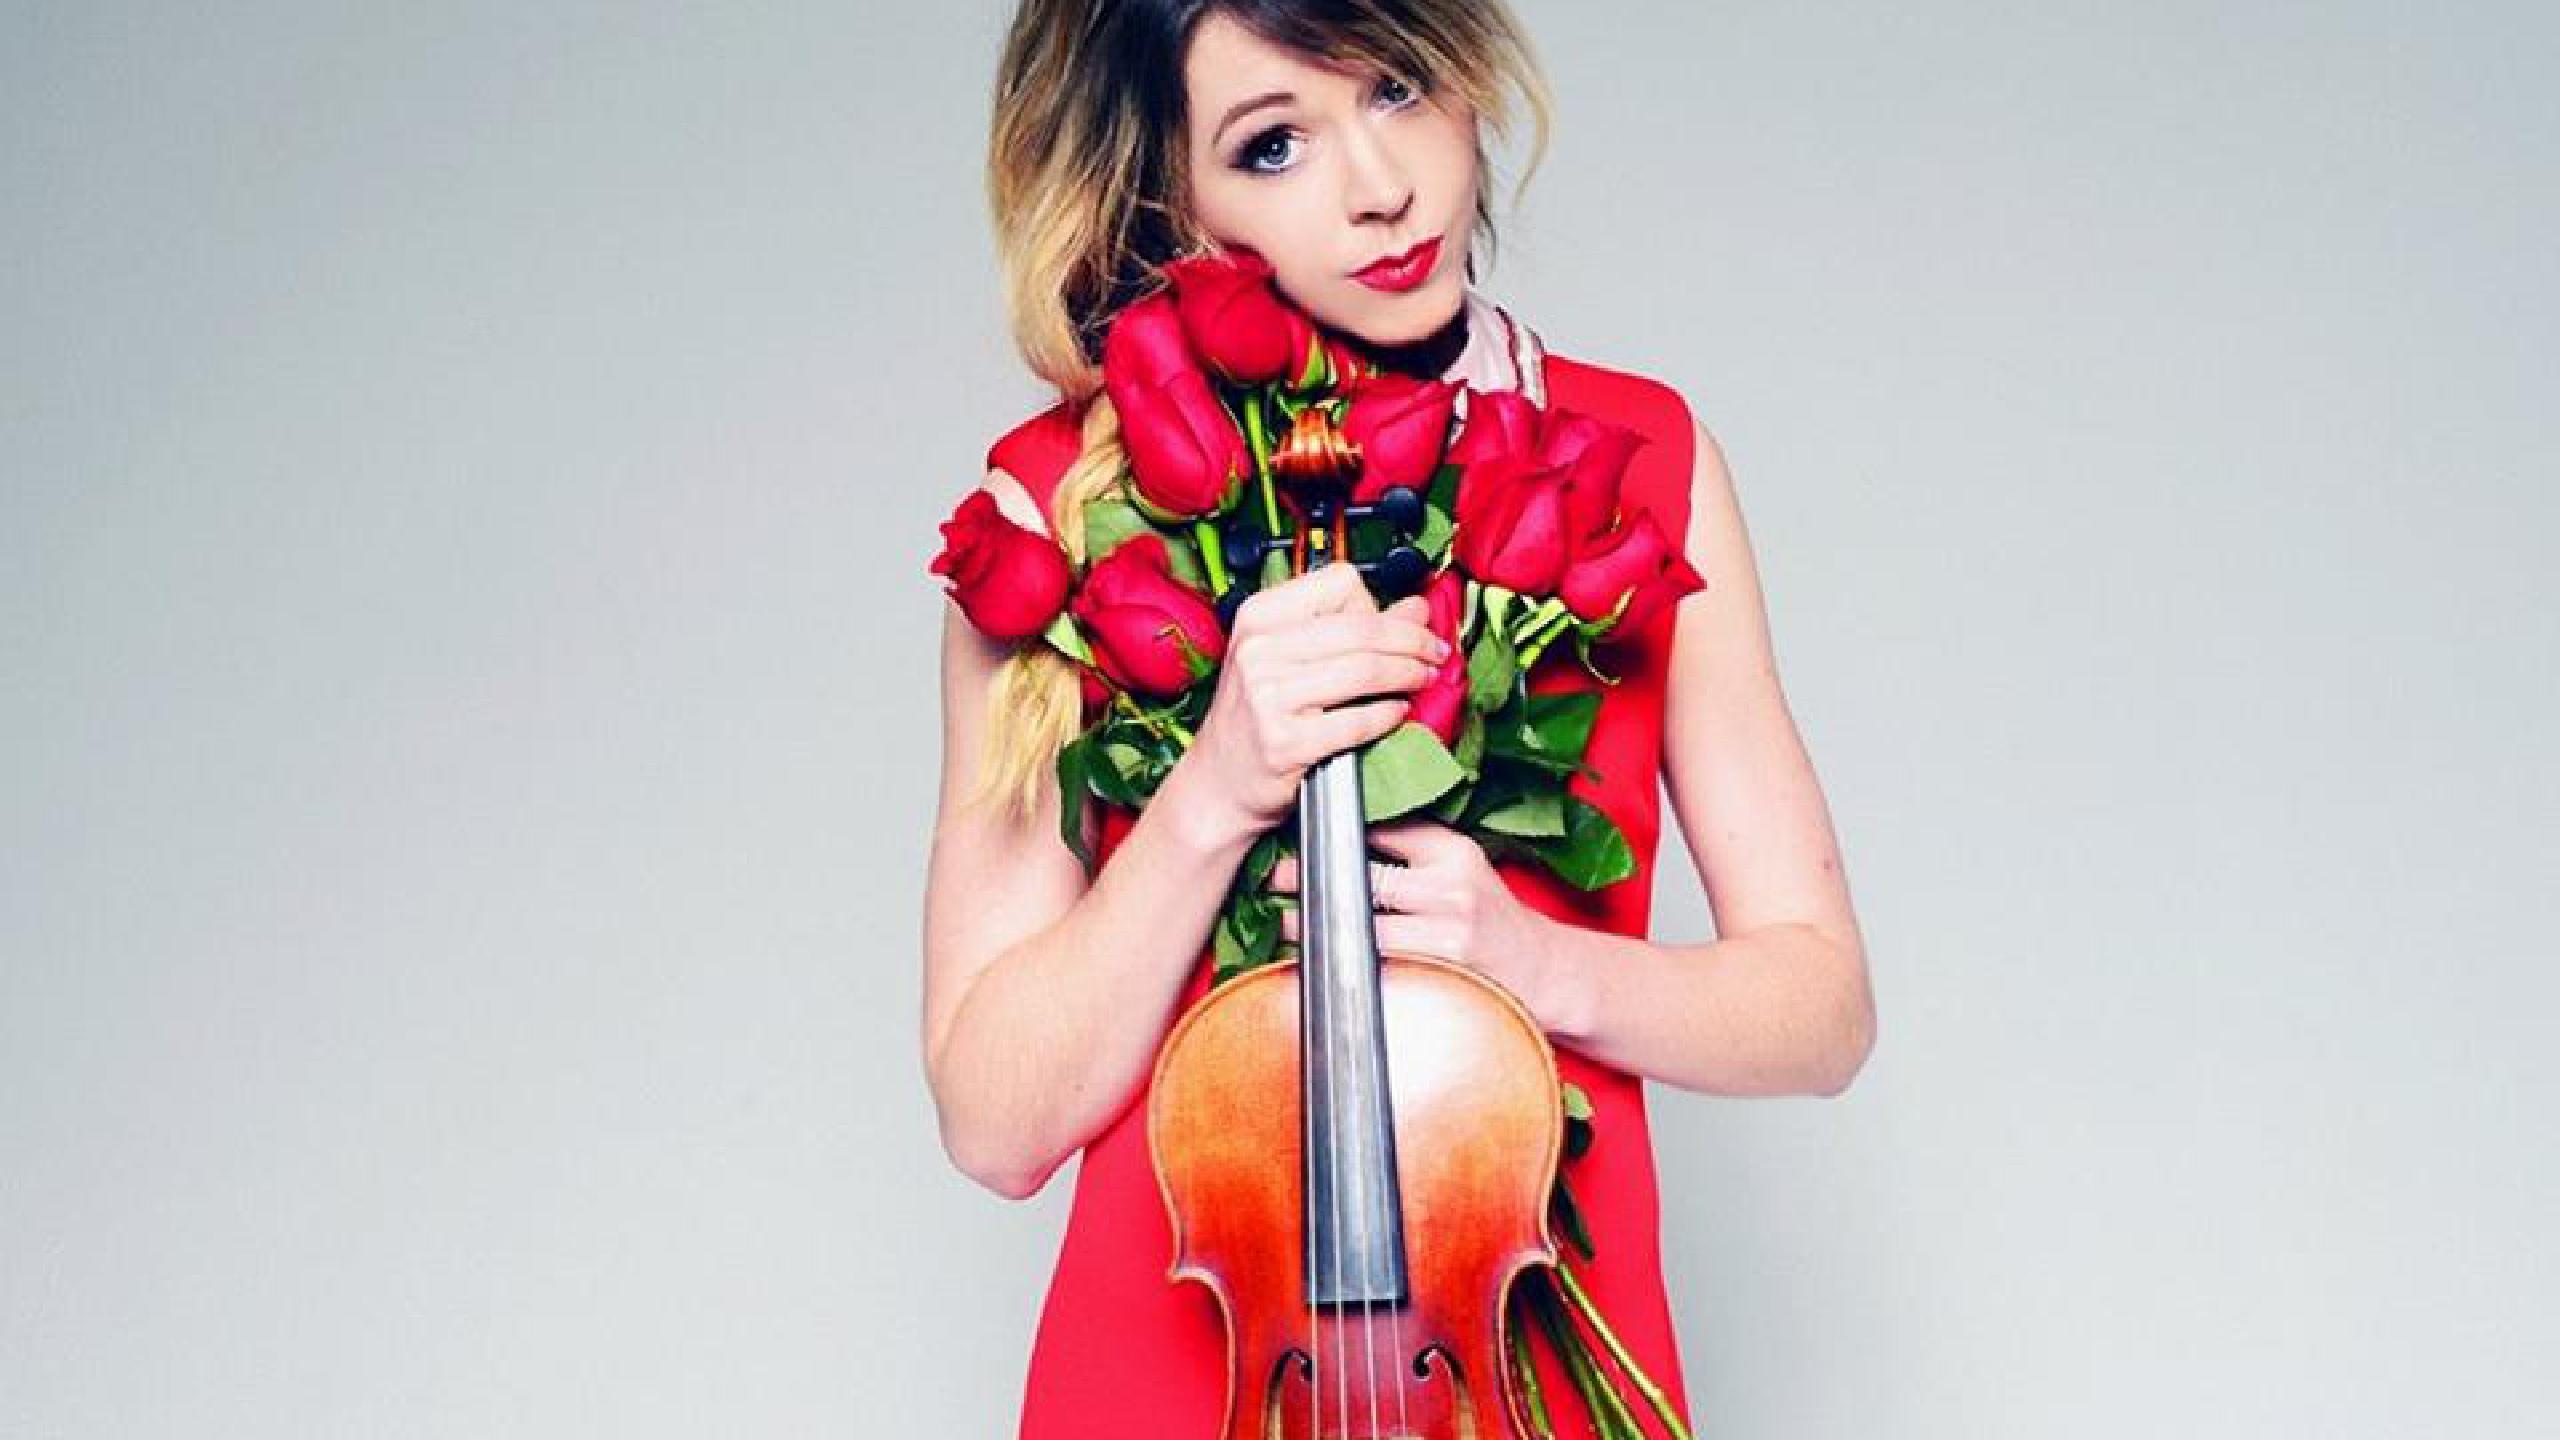 Lindsey Stirling, Tour information, Live concert tickets, Exciting music experience, 2560x1440 HD Desktop